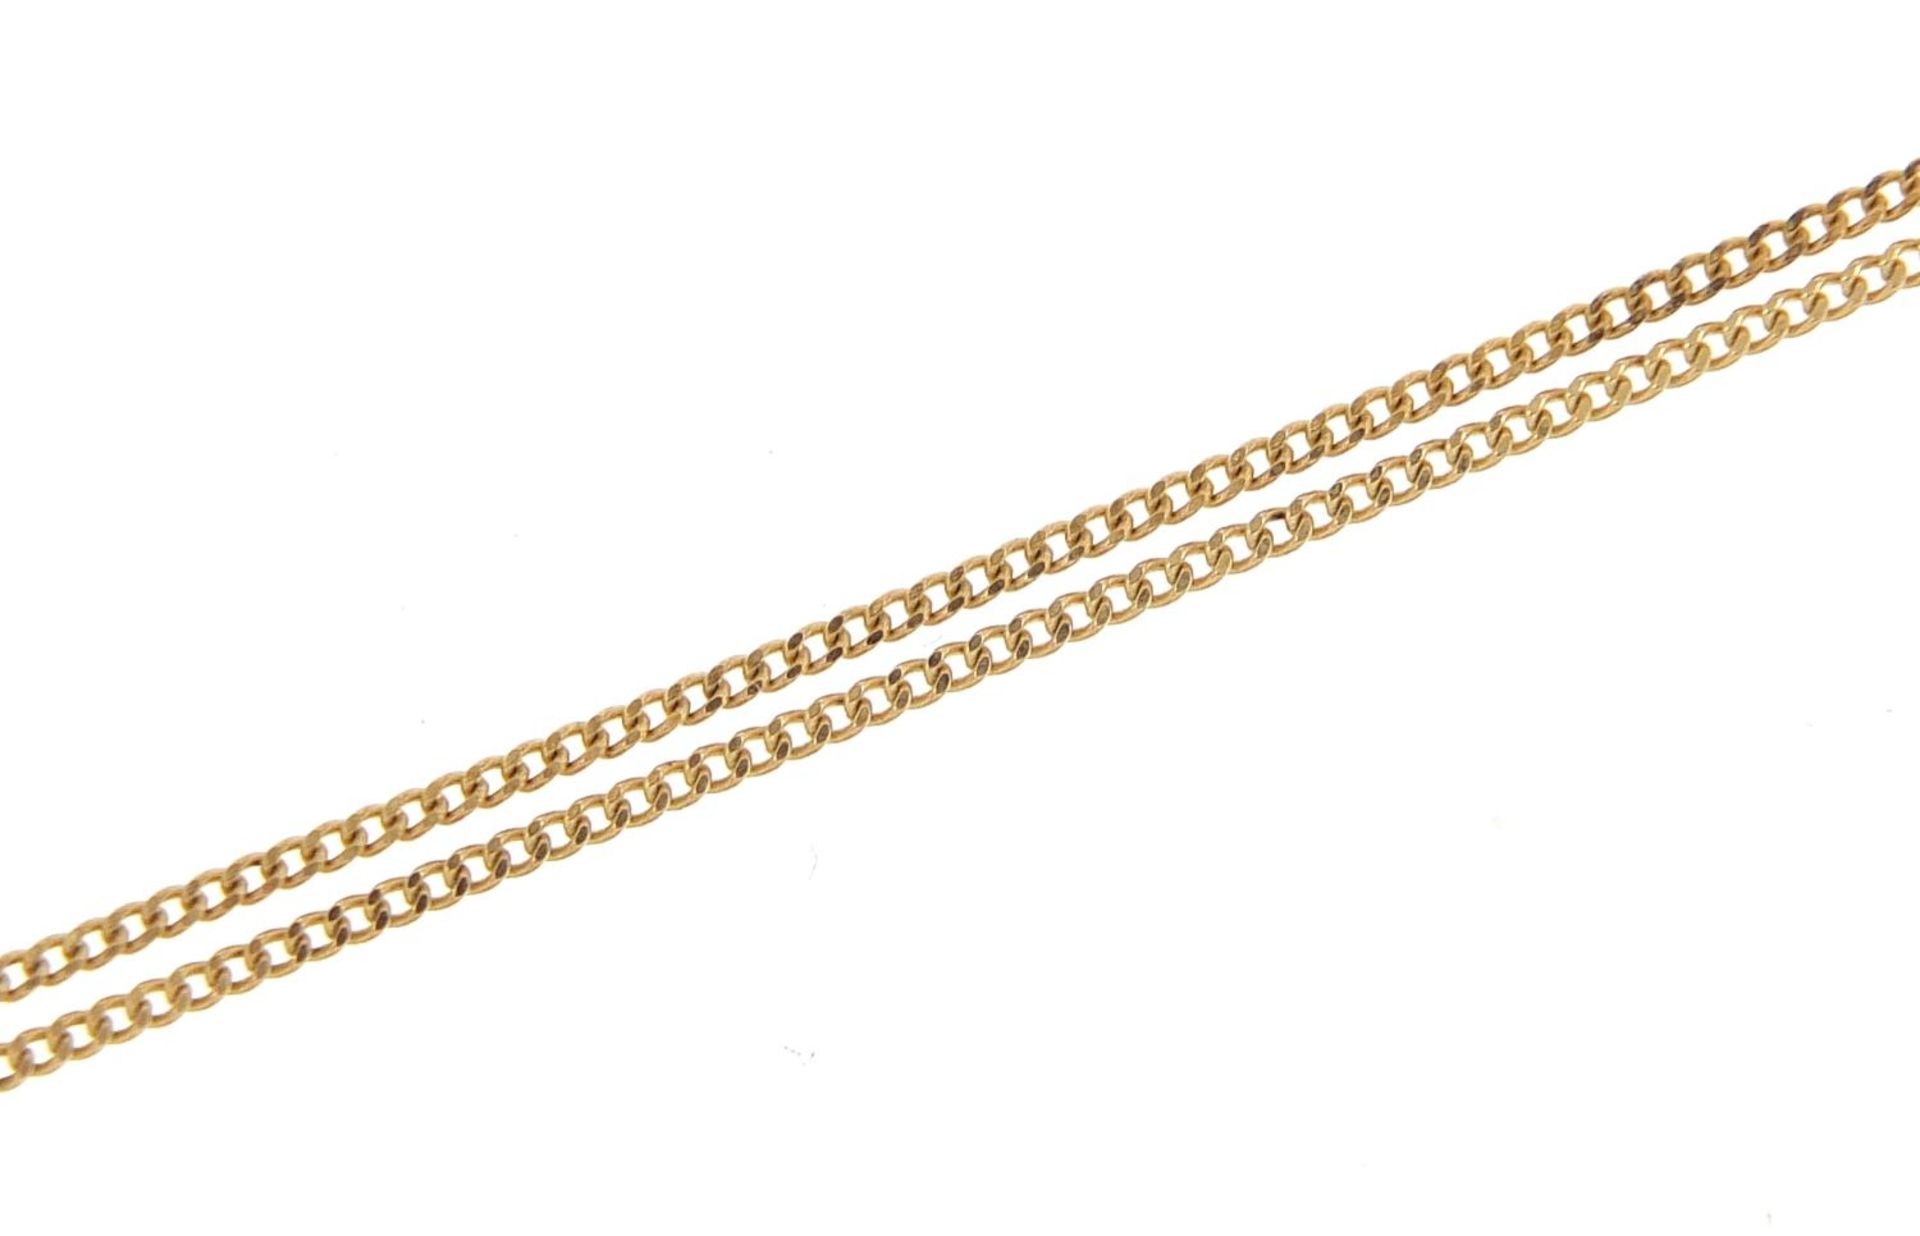 9ct gold curb link necklace, 46cm in length, 1.7g